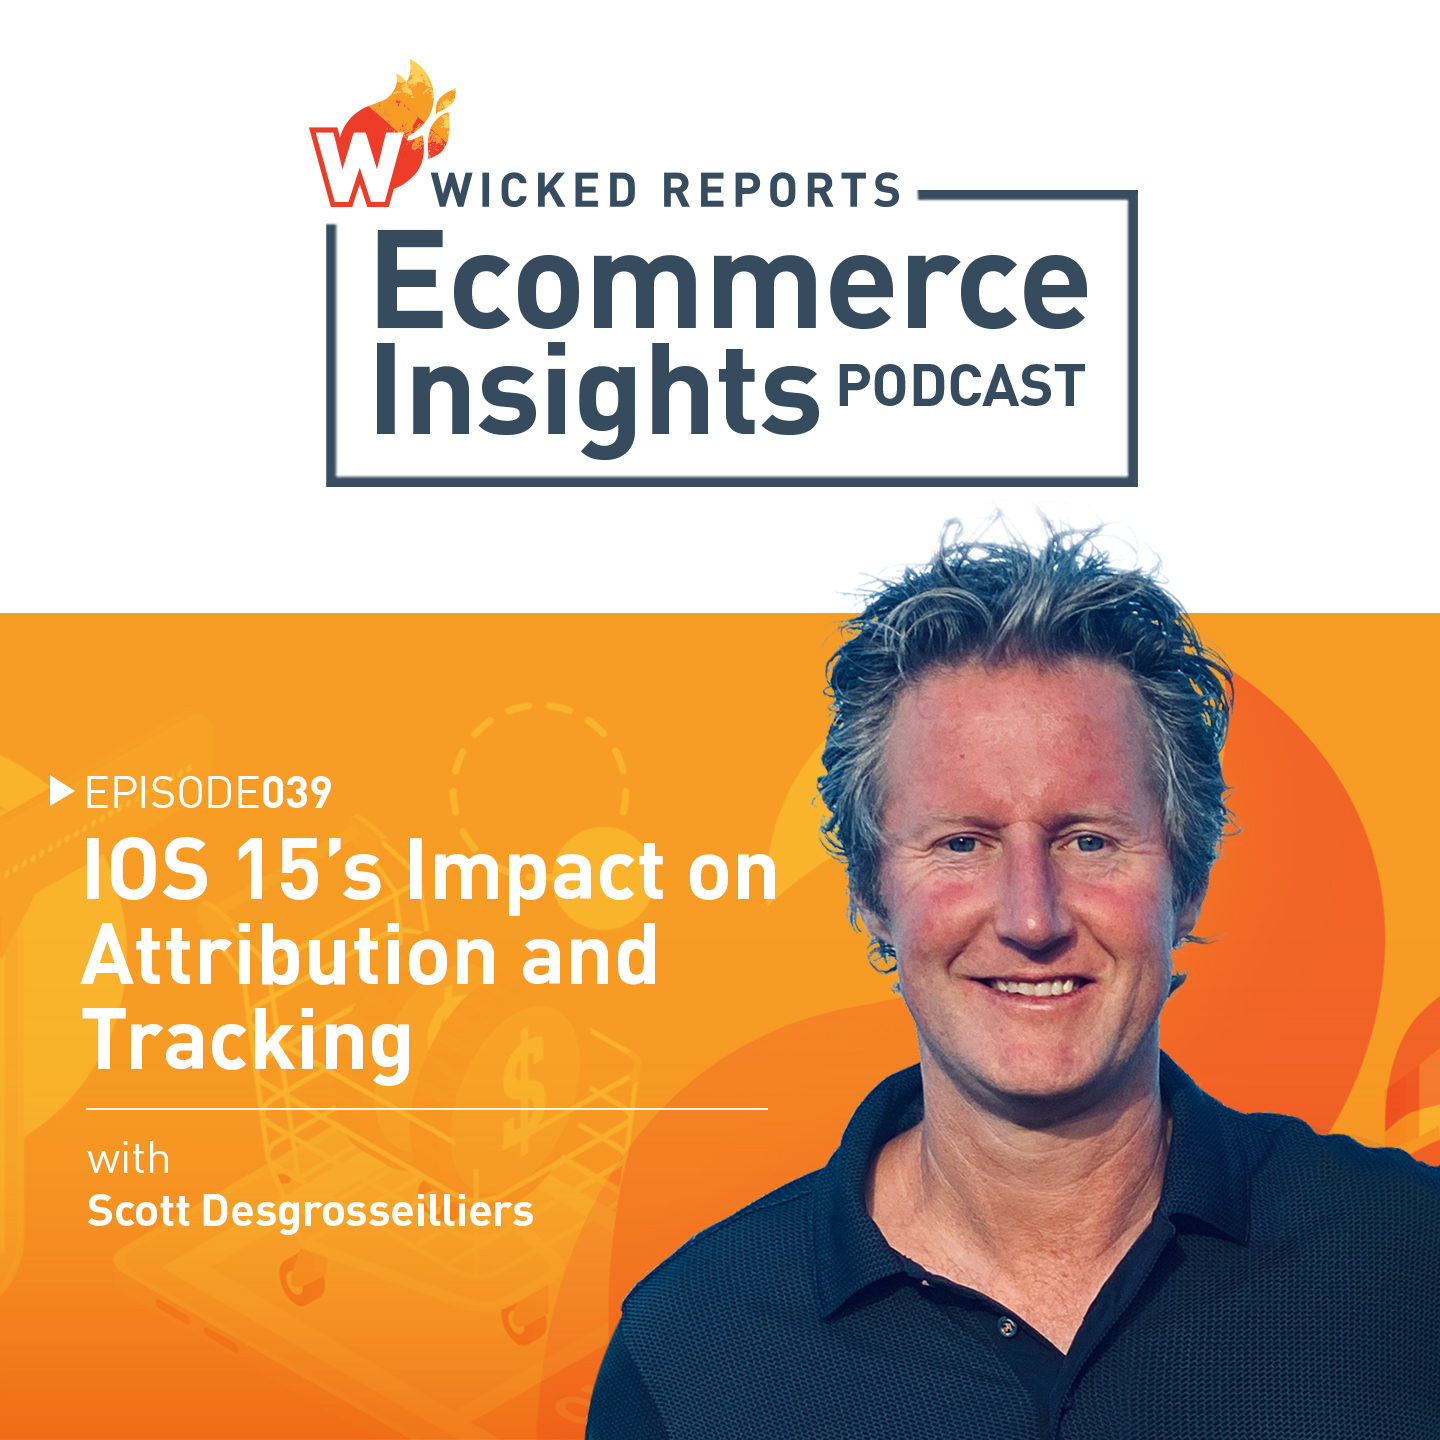 IOS 15’s Impact on Attribution and Tracking